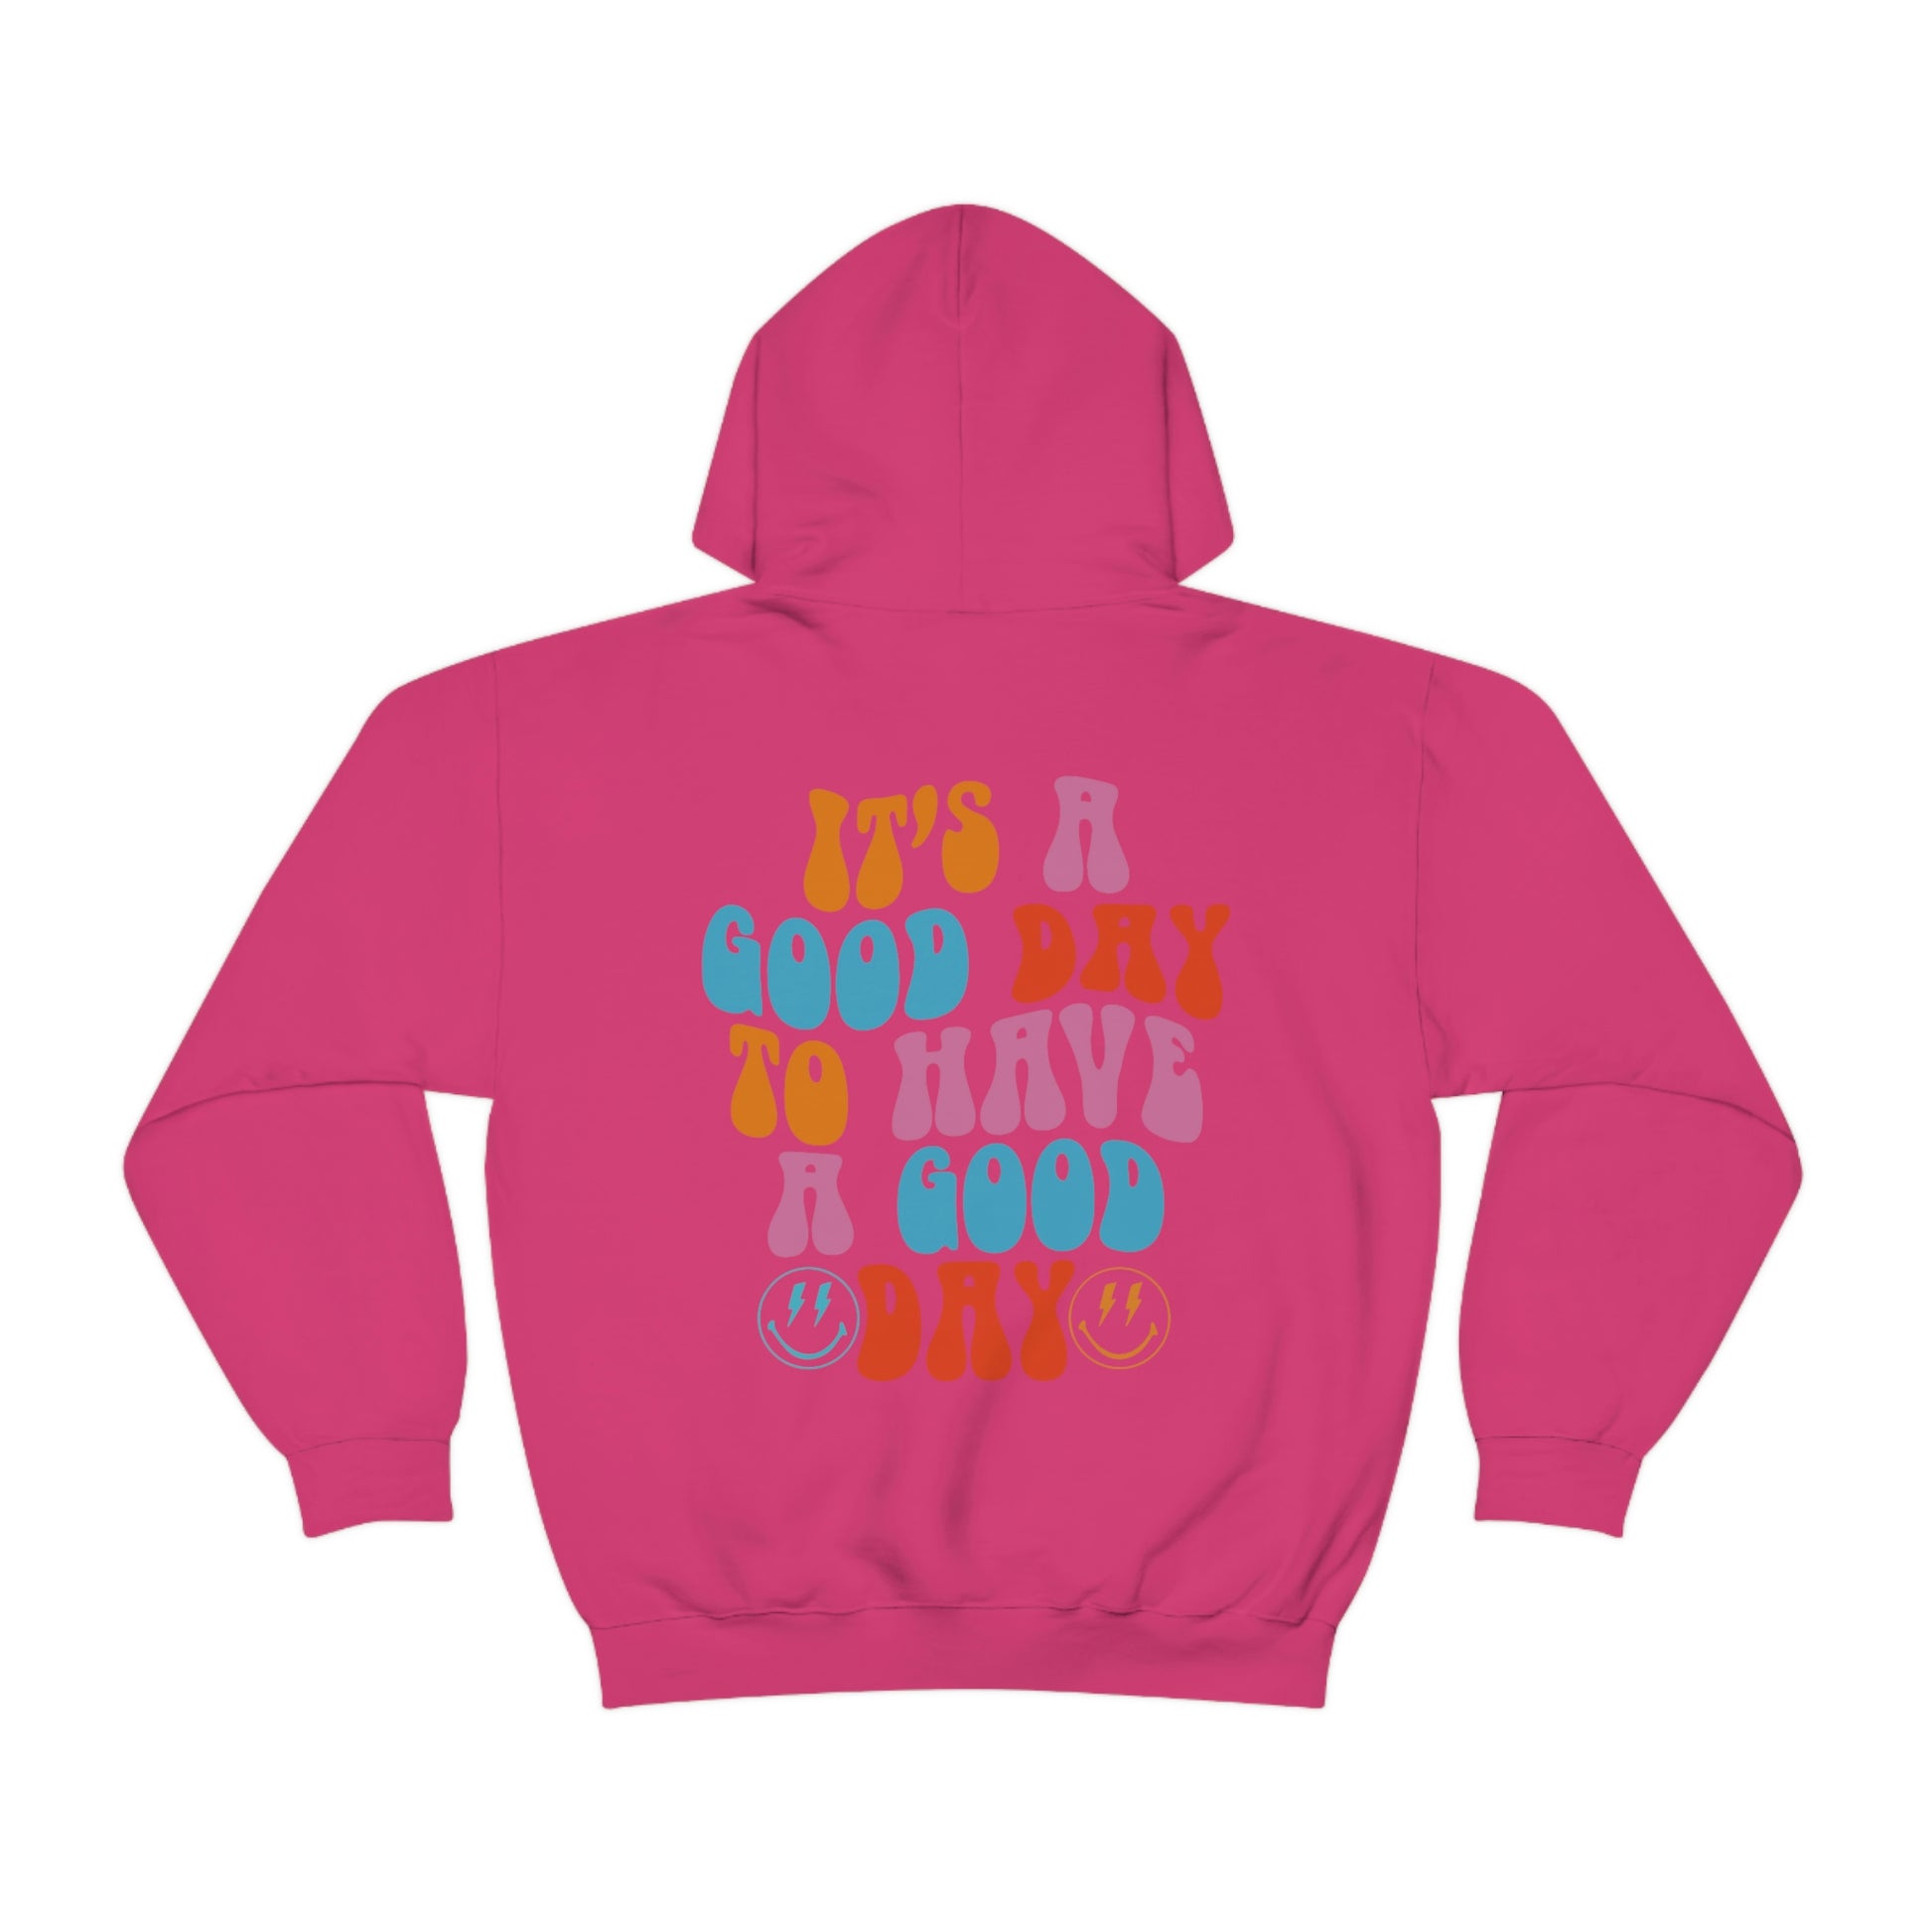 It's A Good Day To Have A Good Day Hoodie - Blank Canvas Fashion